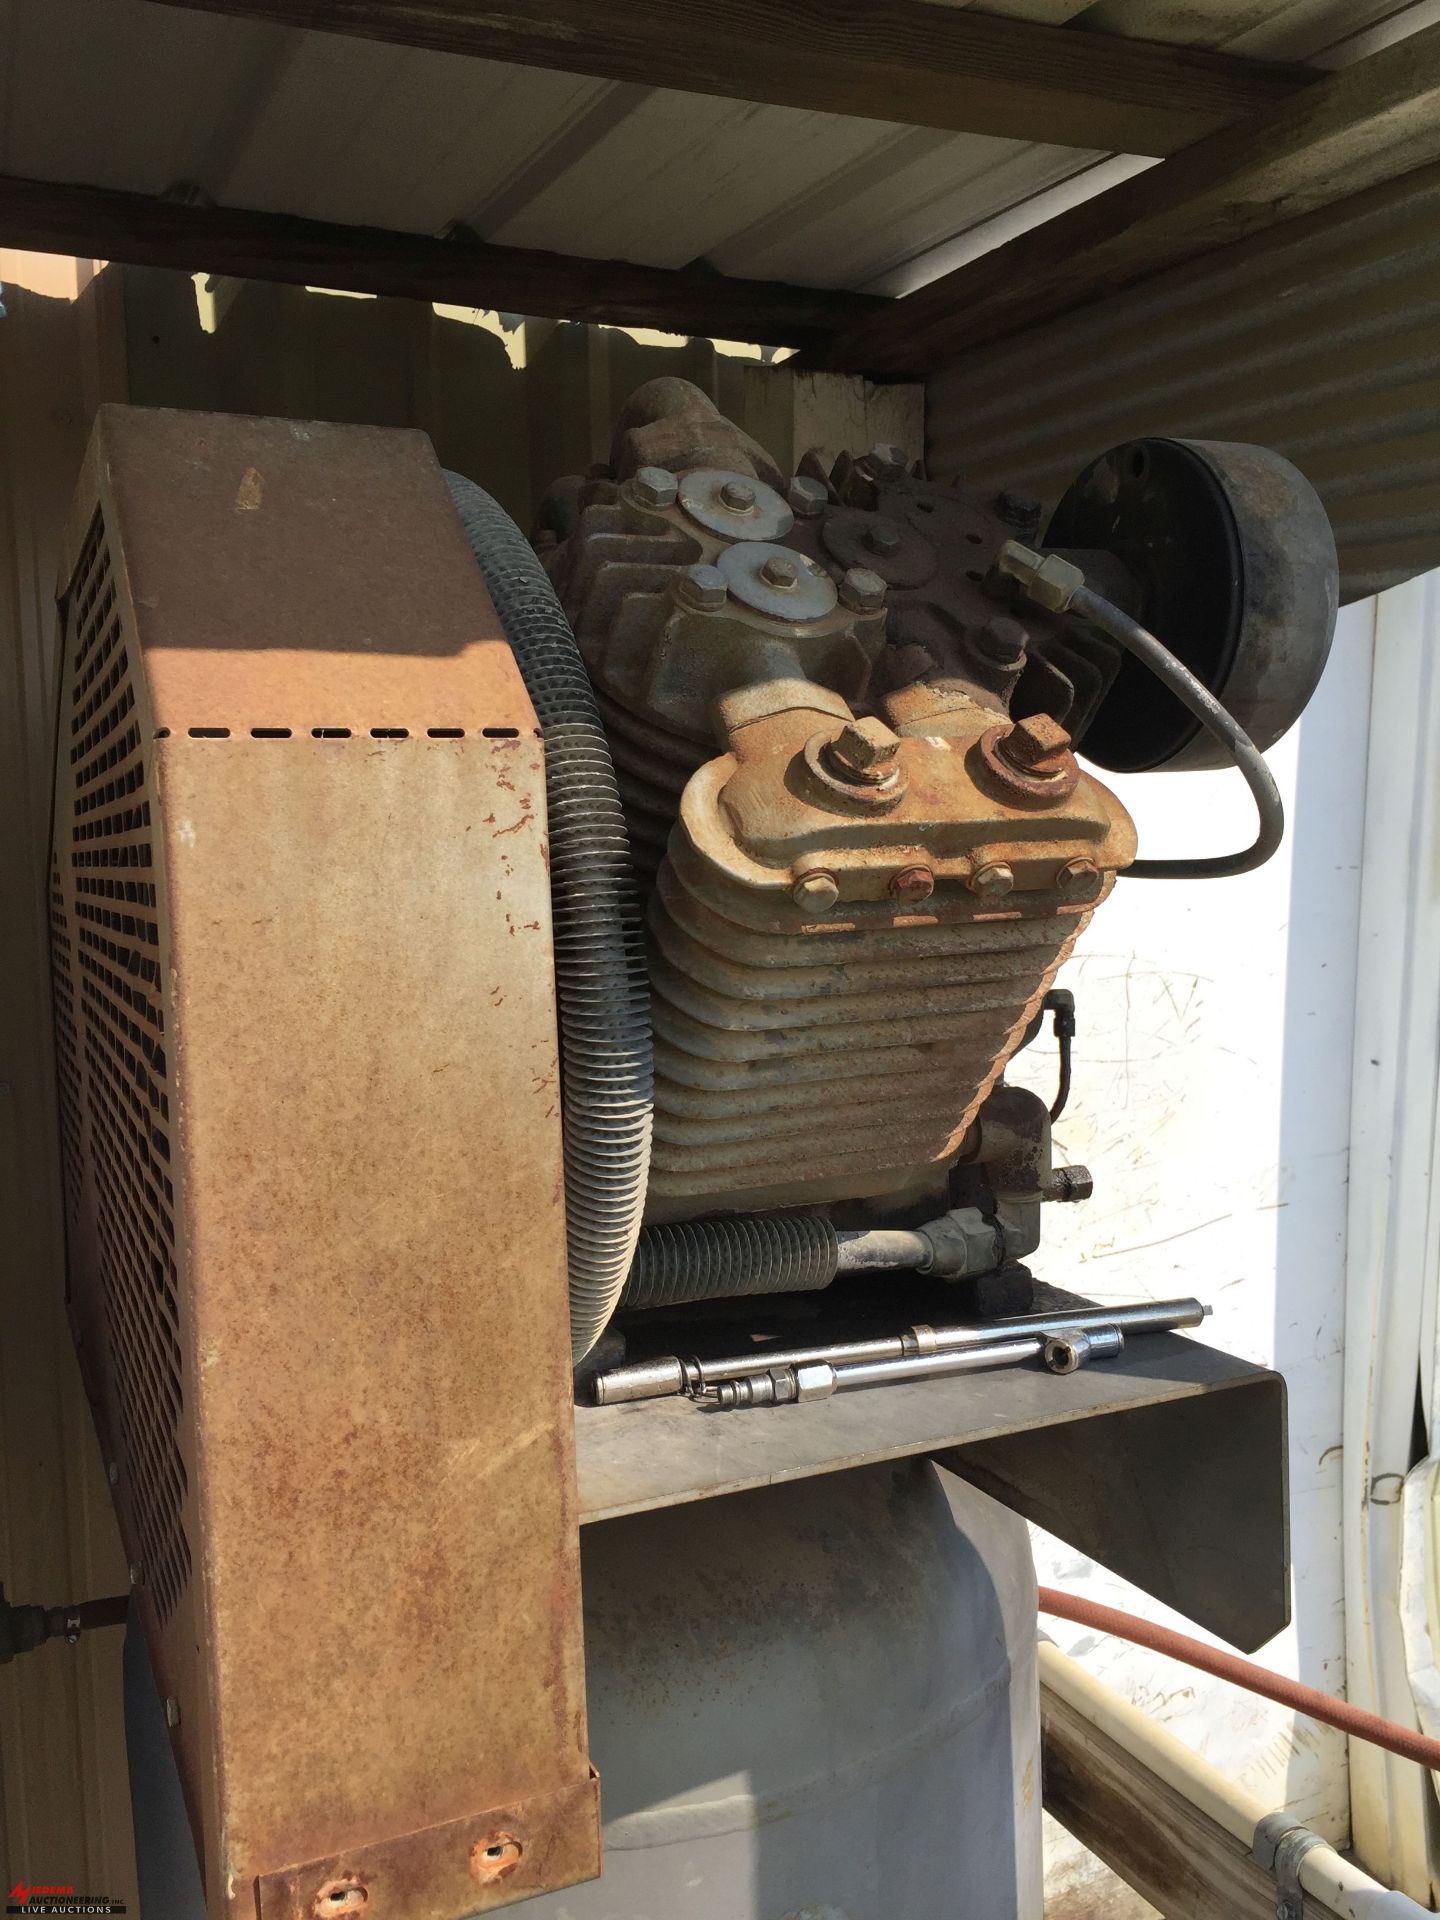 NAPA 2-STAGE AIR COMPRESSOR, BUYER RESPONSIBLE FOR REMOVAL - Image 5 of 6